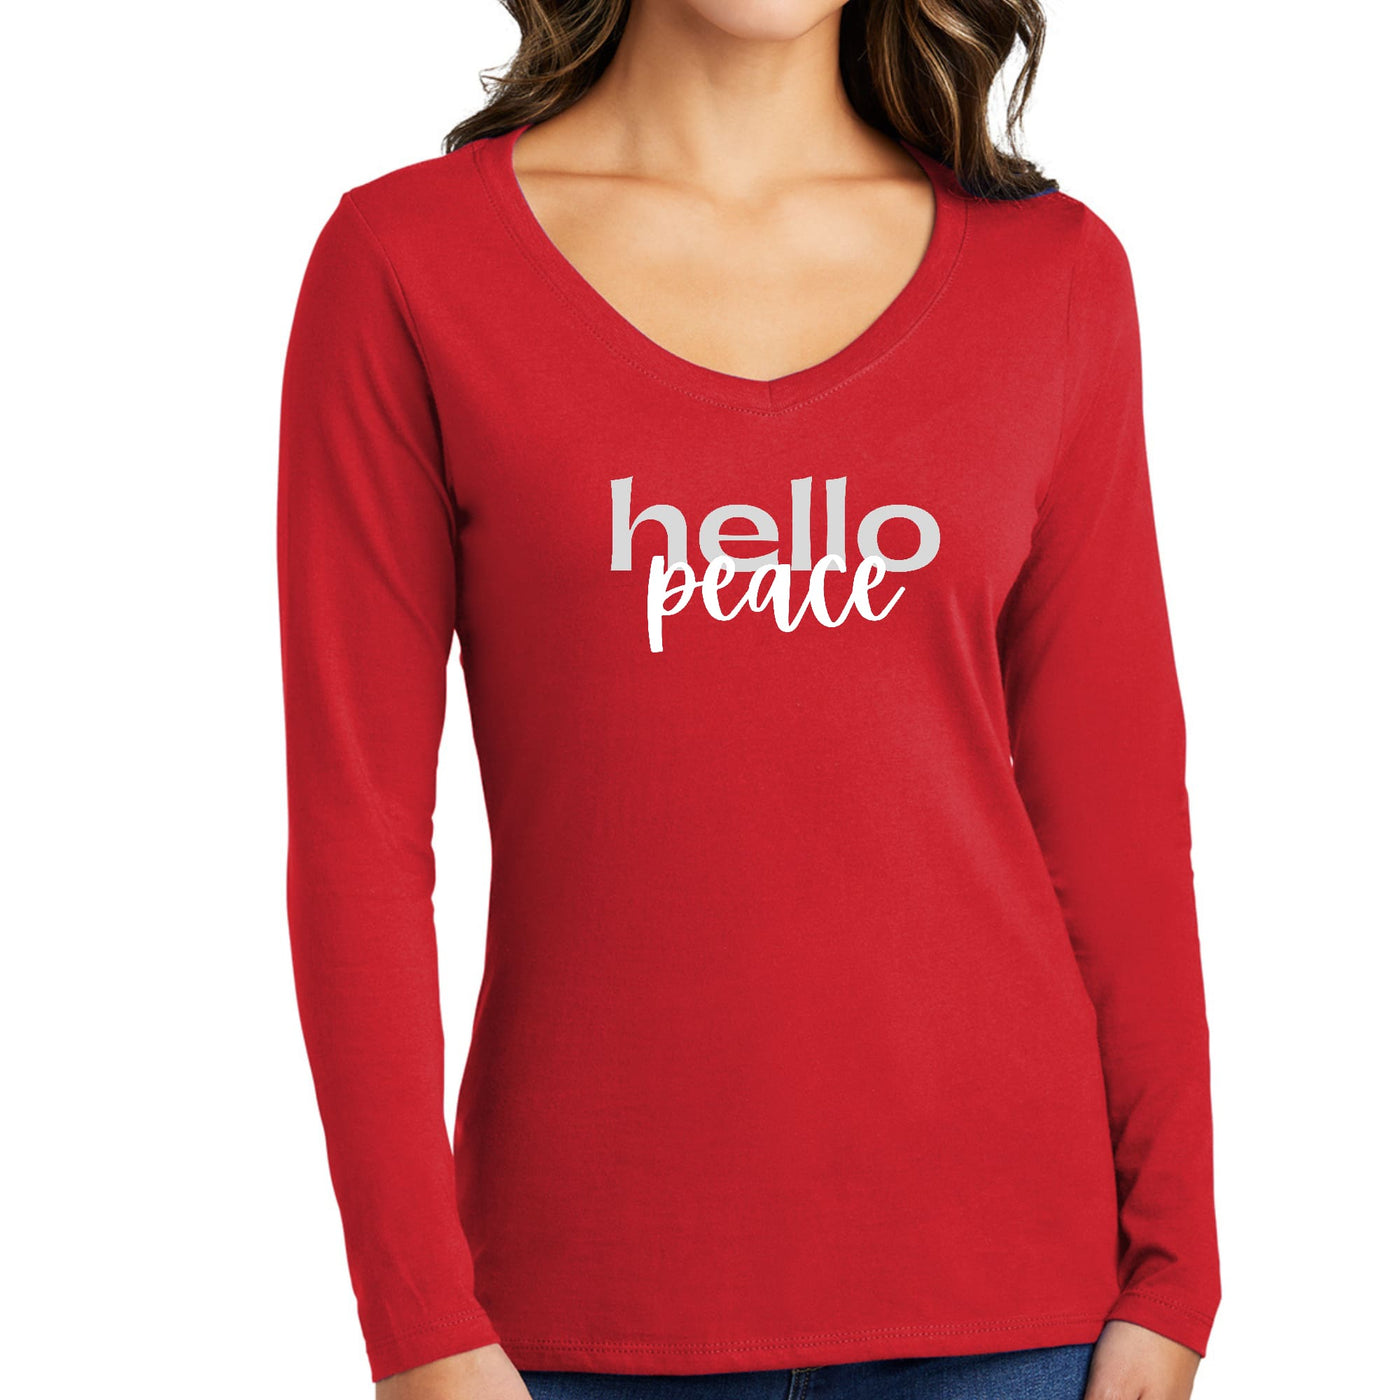 Womens Long Sleeve Graphic T - shirt Hello Peace Motivational Peaceful - T